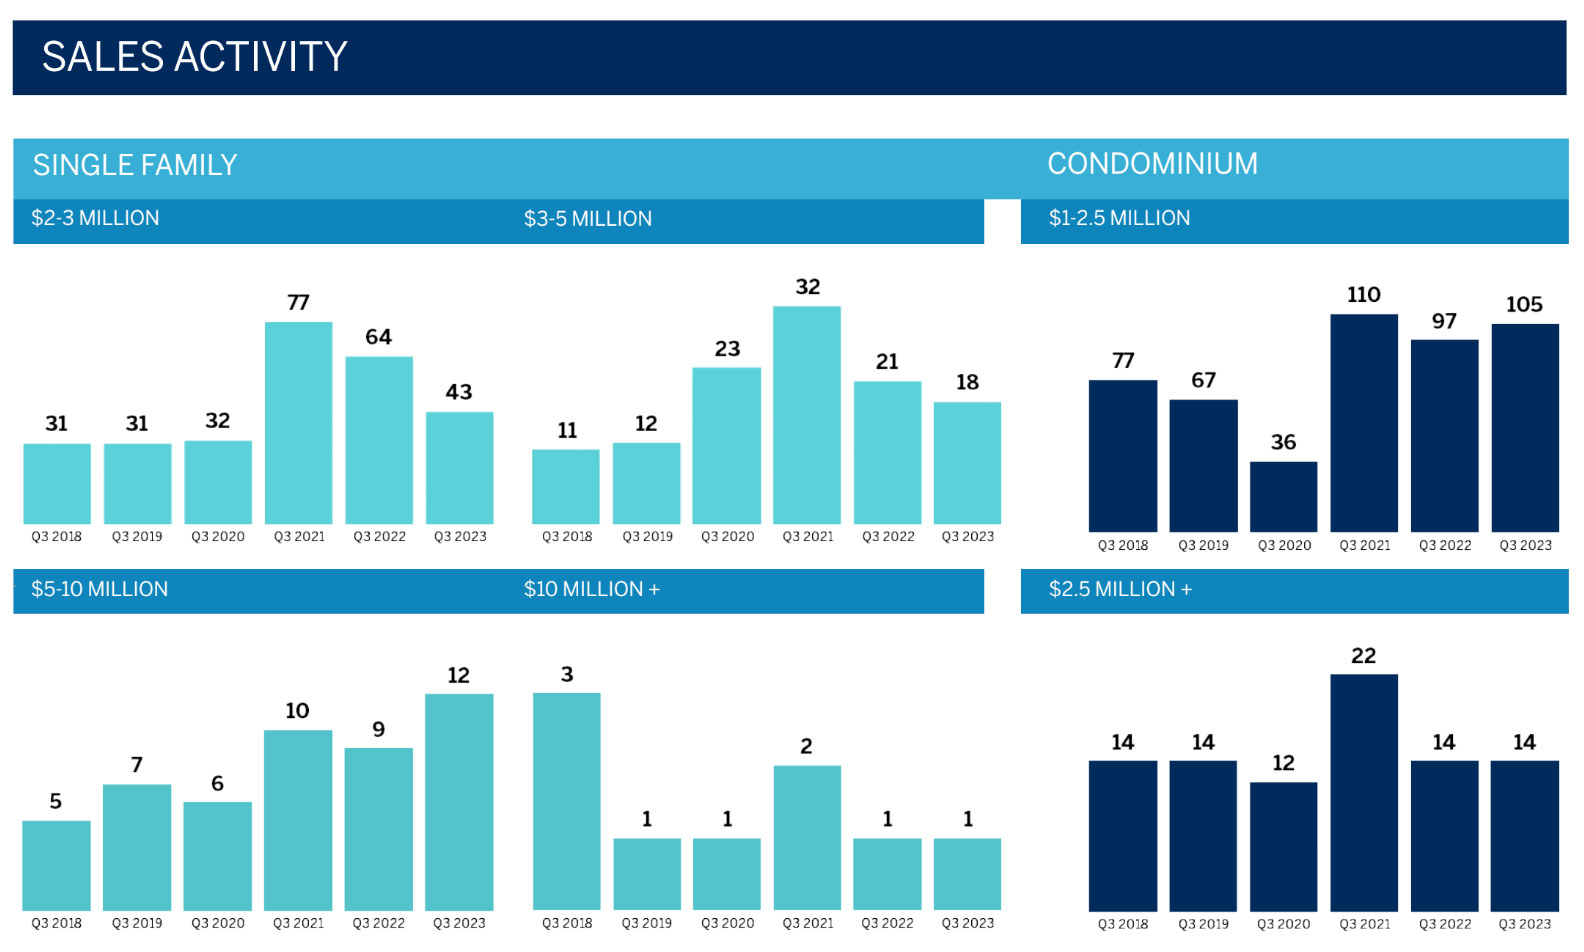 LIST Sotheby's 3rd Quarter Luxury Market Report for Hawaii